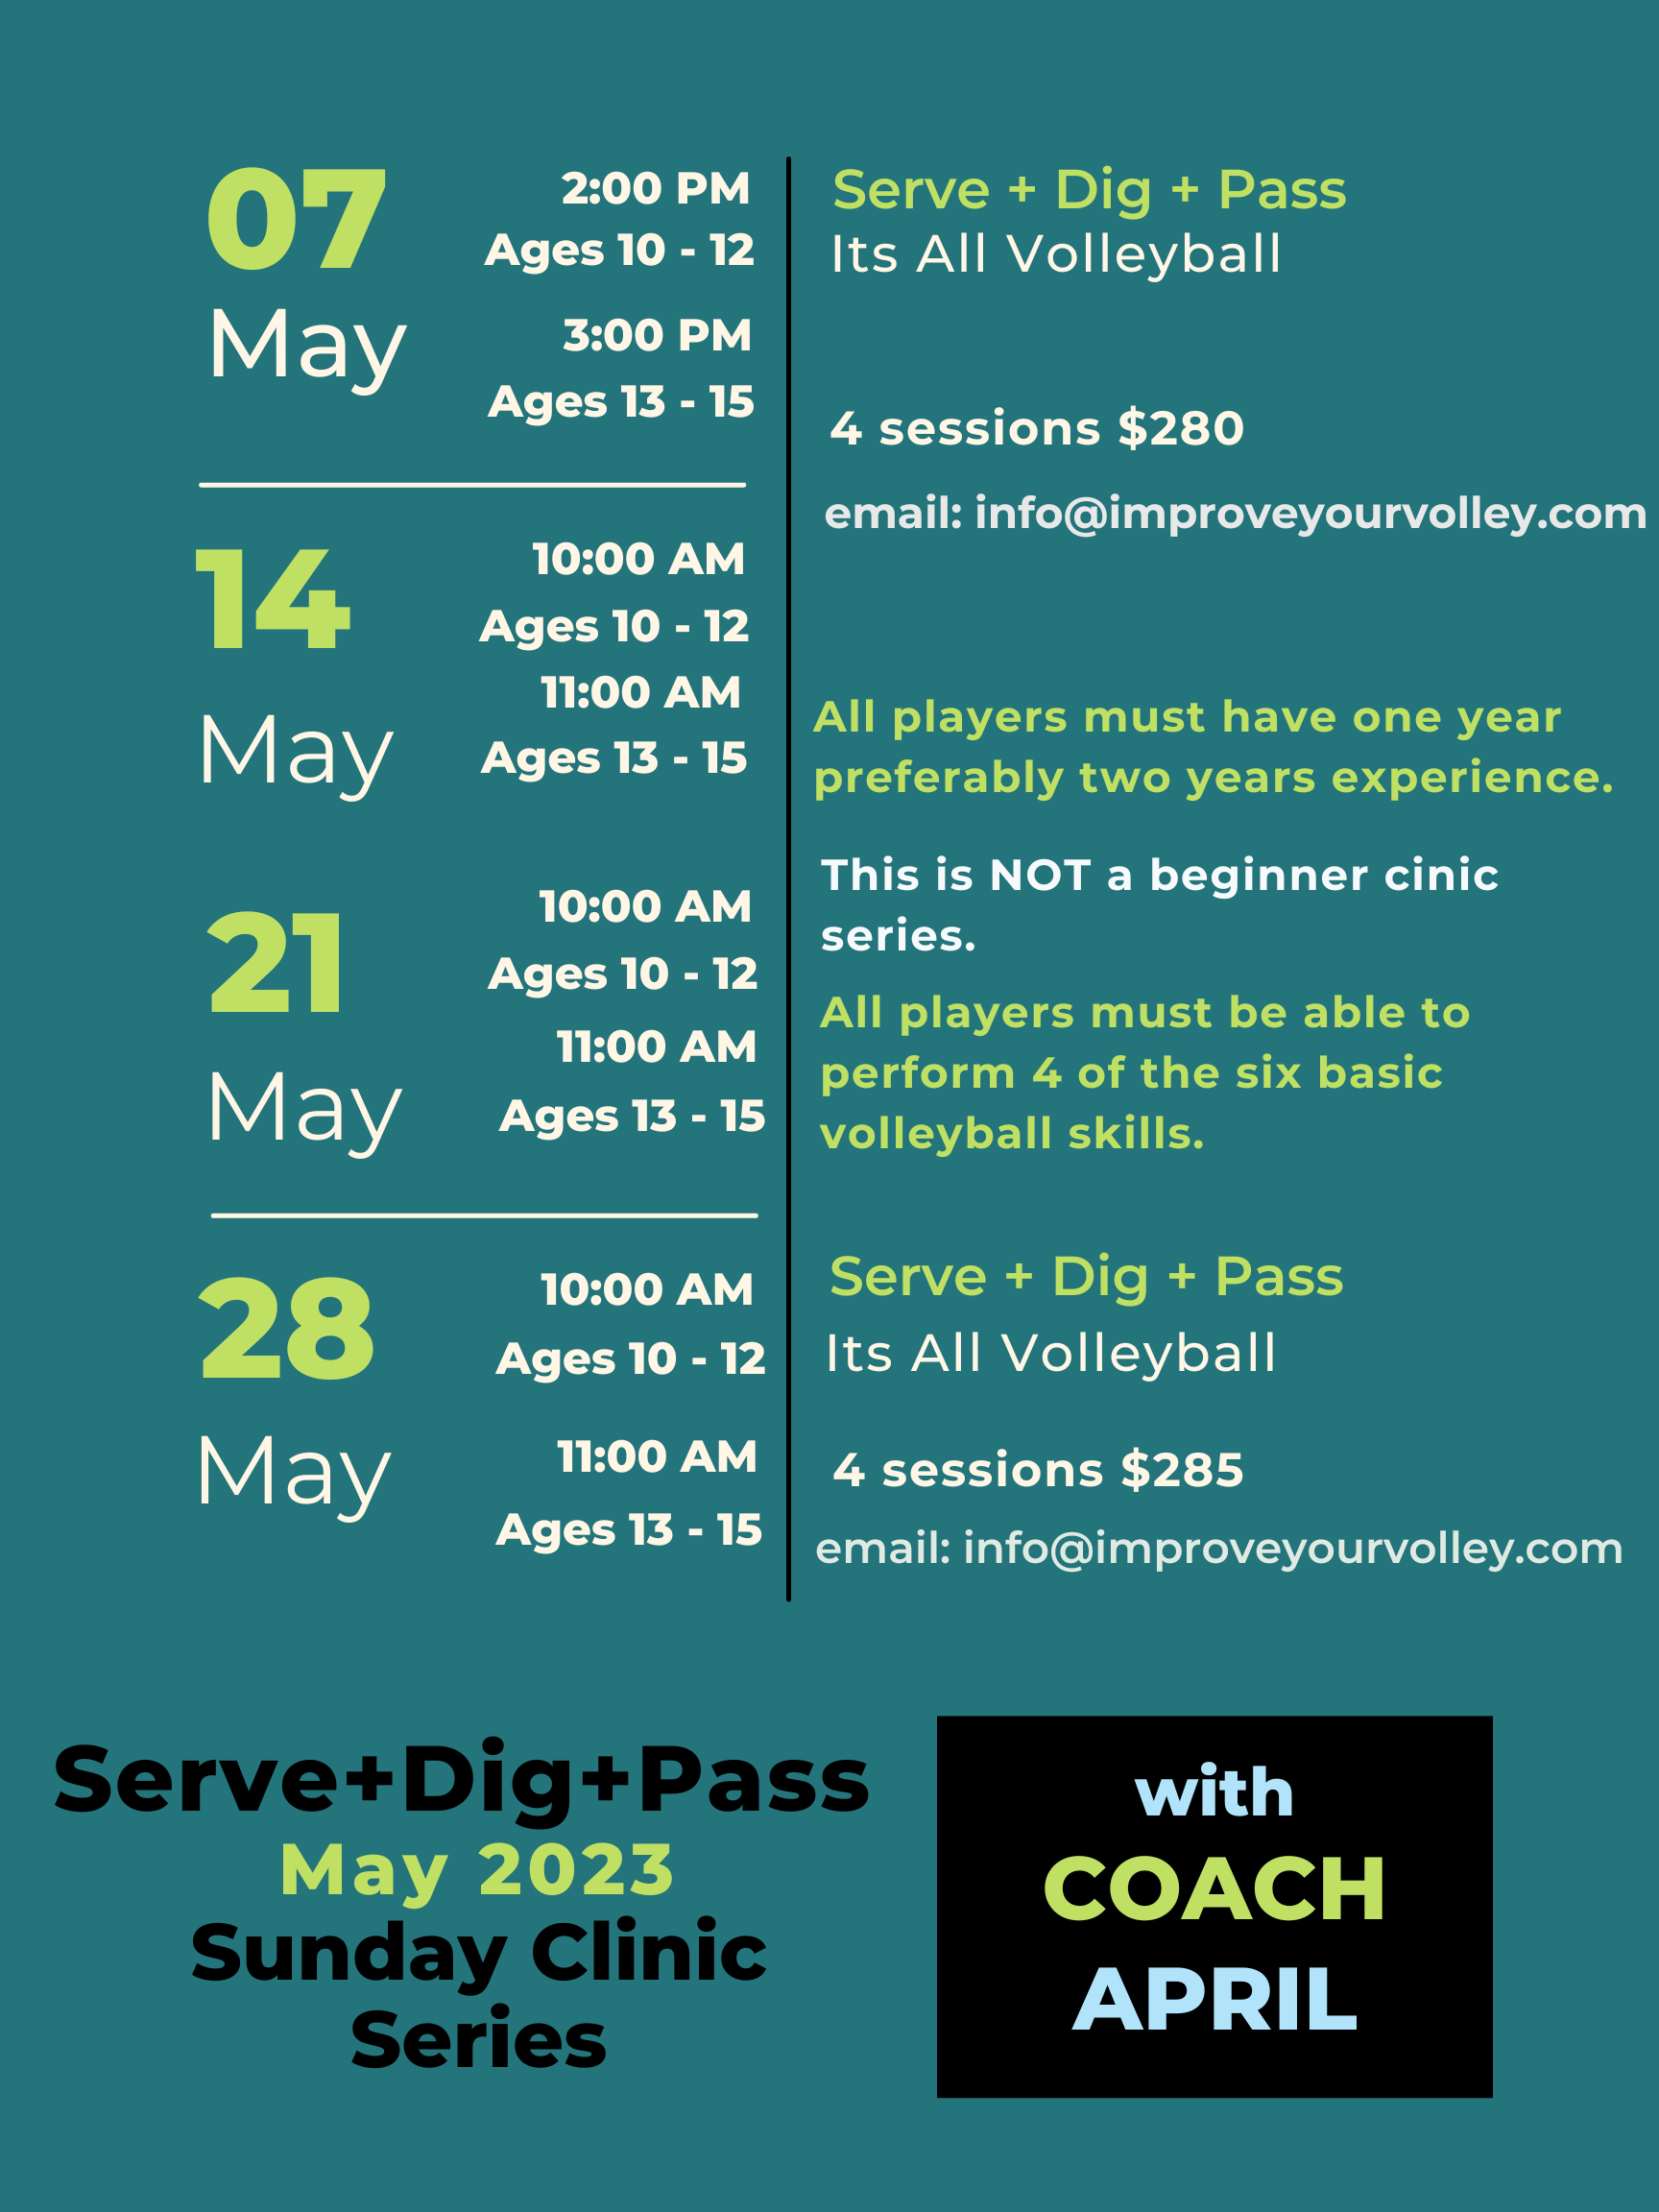 Registration is now open for May 2023 Serve+Dig+Pass+Clinics hosted by me, Coach April. Four two hour sessions on four Sundays in May from 10-11 for ages 10-12 and from 11 - 12 for ages 13 - 15. Must have 1-2 years of experience.  Limited spaces available. Spots will sell out. Email info@improveyourolley.com for more information.